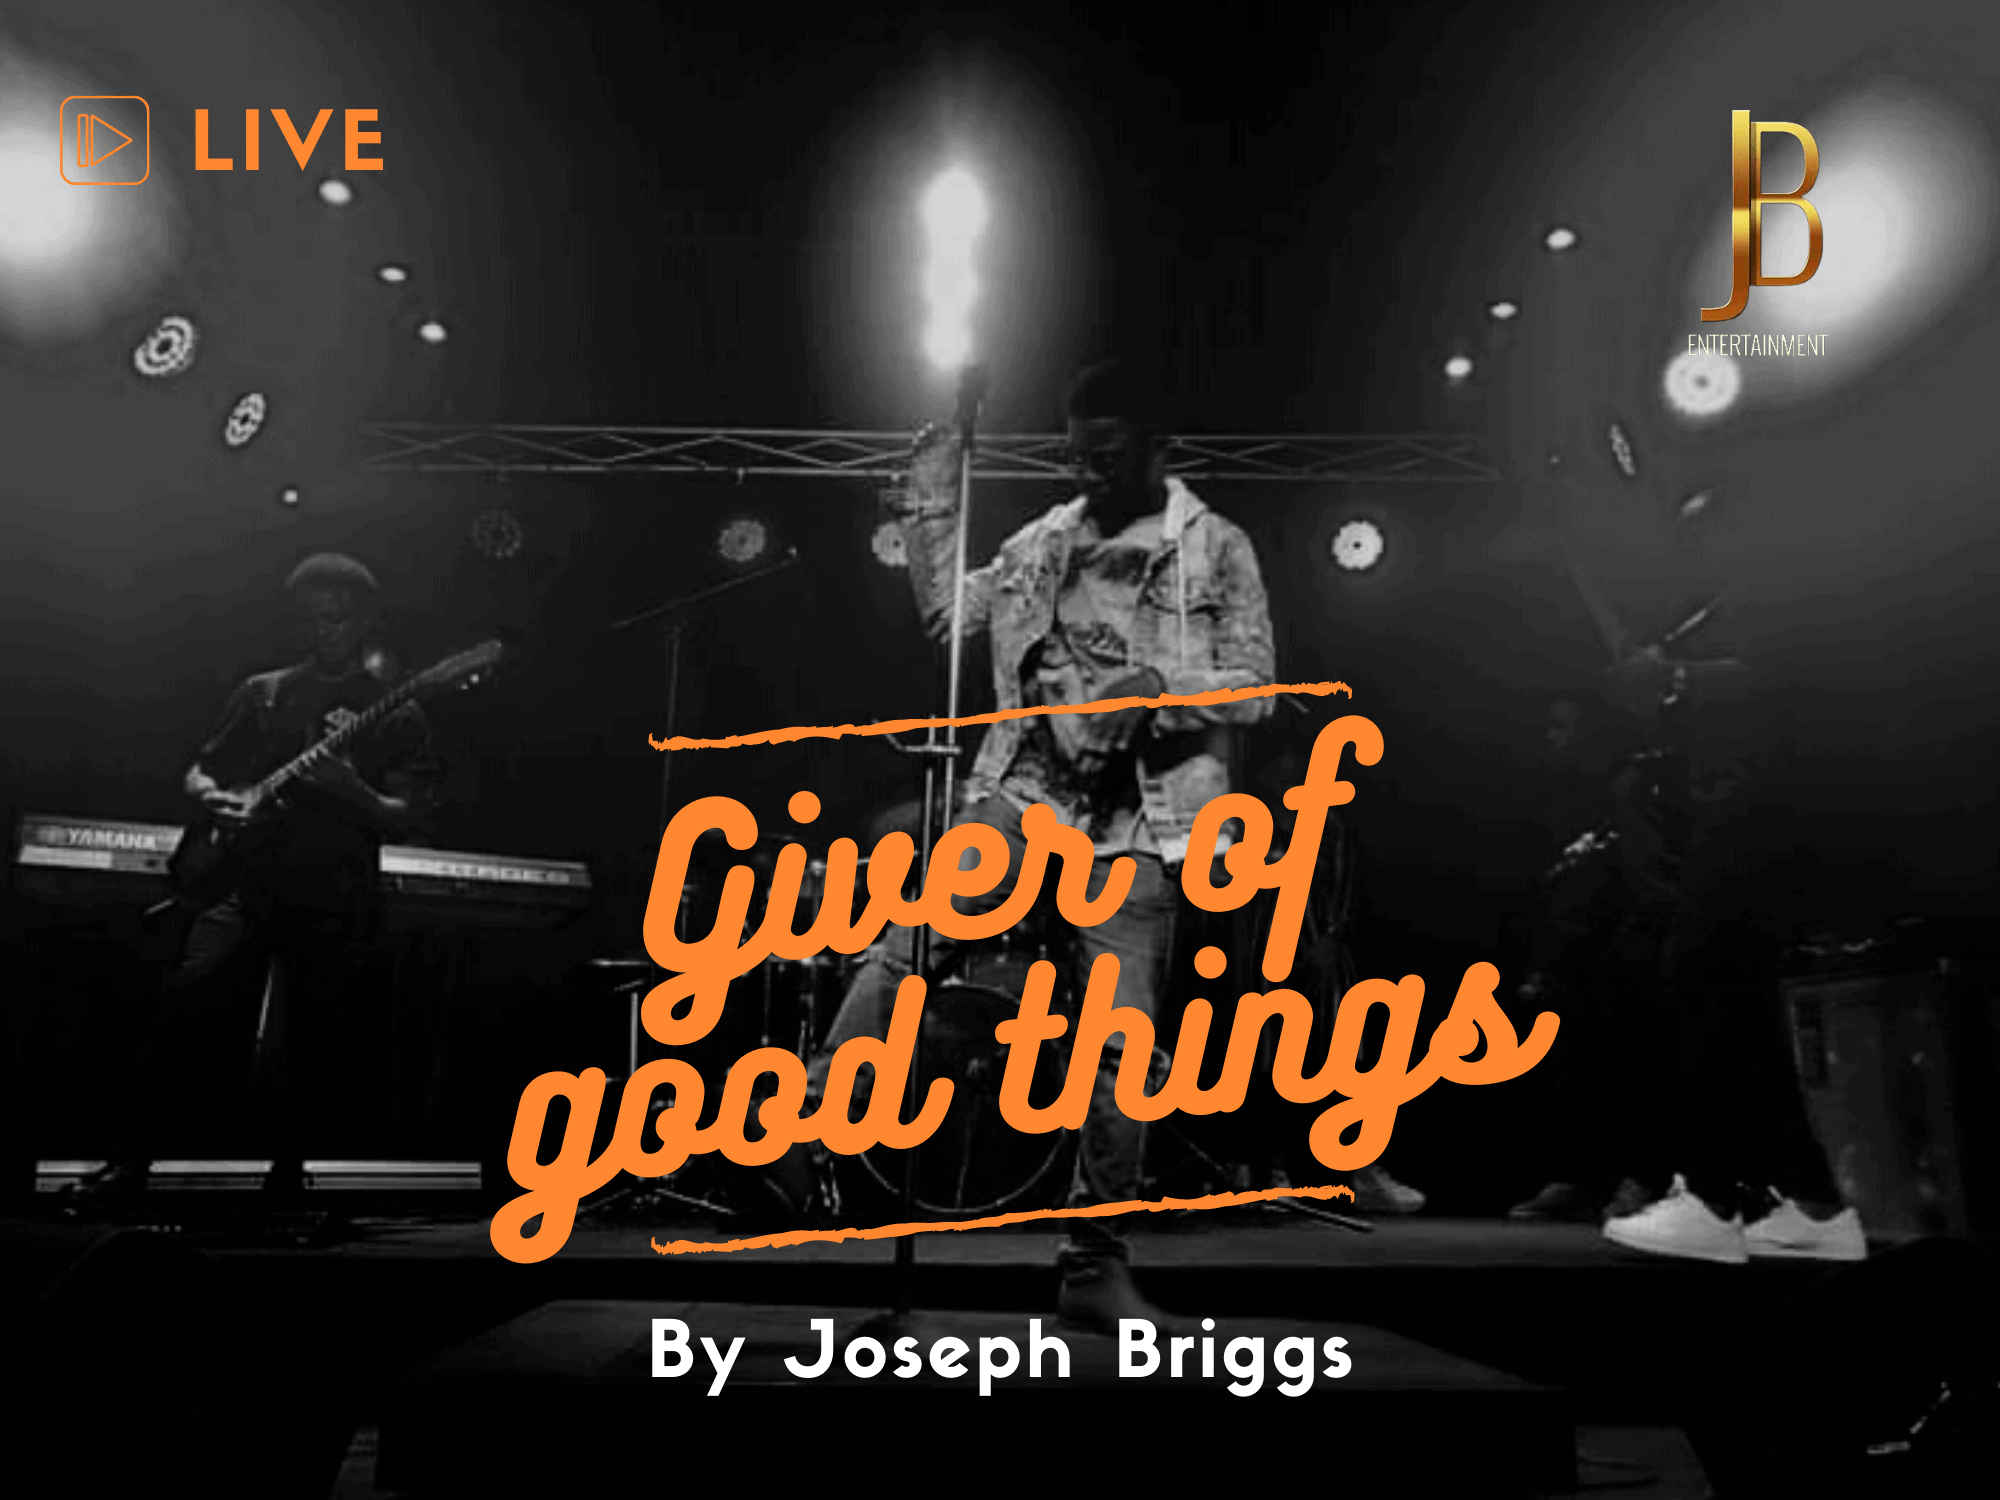 Music Video: Joseph Briggs - Giver of Good Things